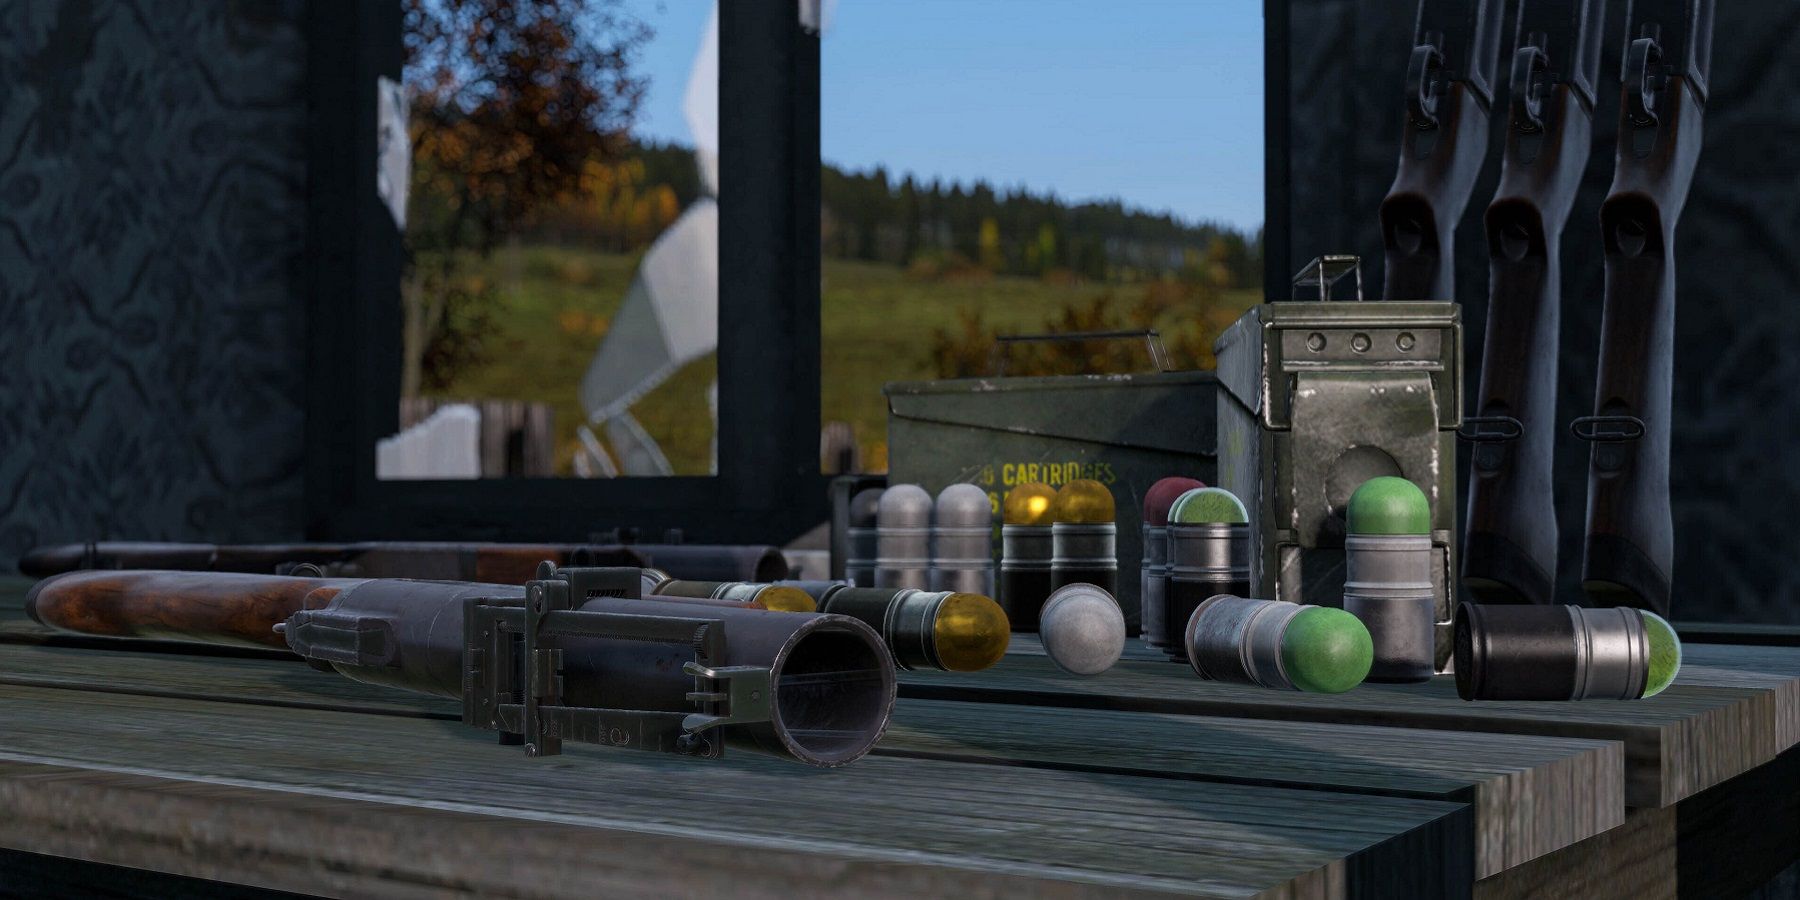 Screenhot from DayZ showing a greande launcher on the table with ammunition.